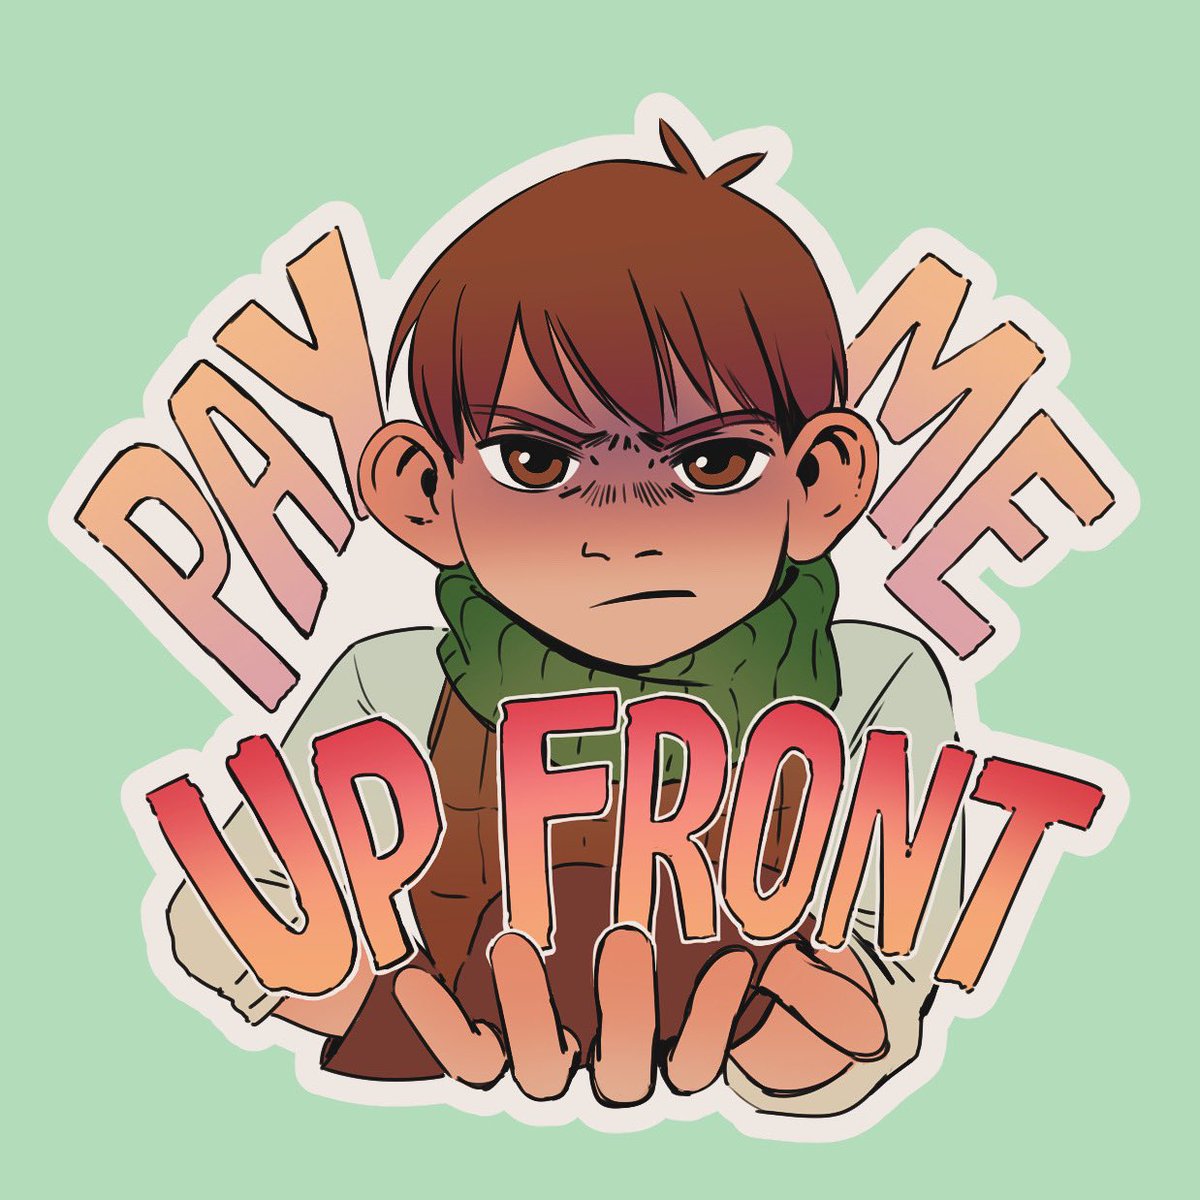 I am making stickers of chilchuck dungeon meshi